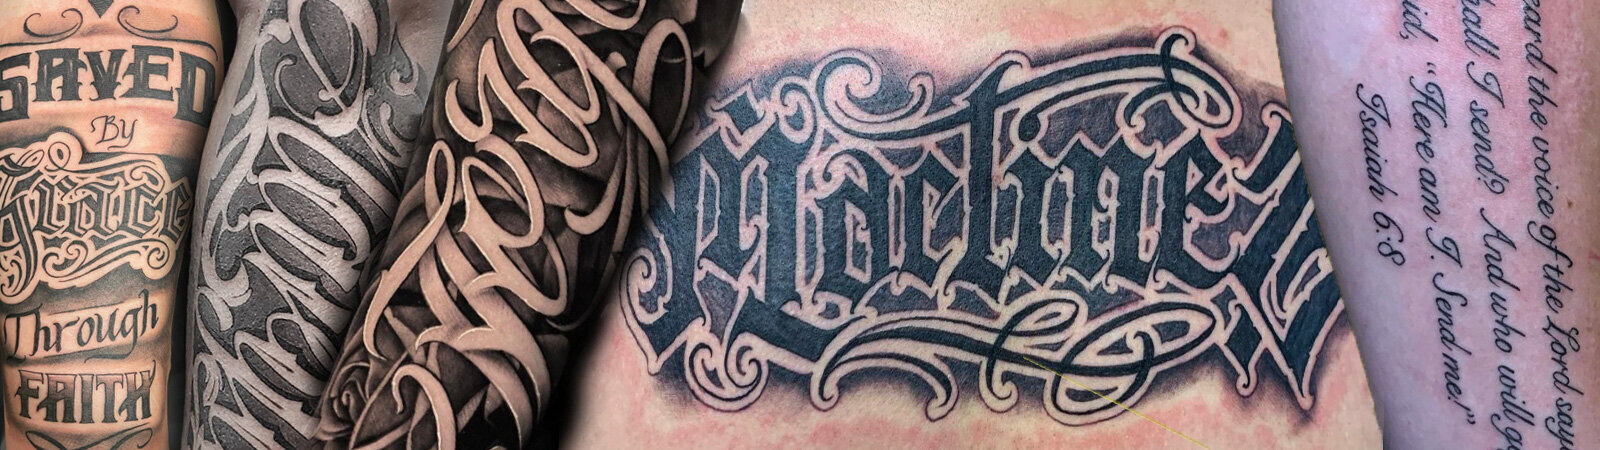 Explore The Beauty of Letter Tattoos - Incredible Designs & Skilled Artists — Certified Tattoo Studios